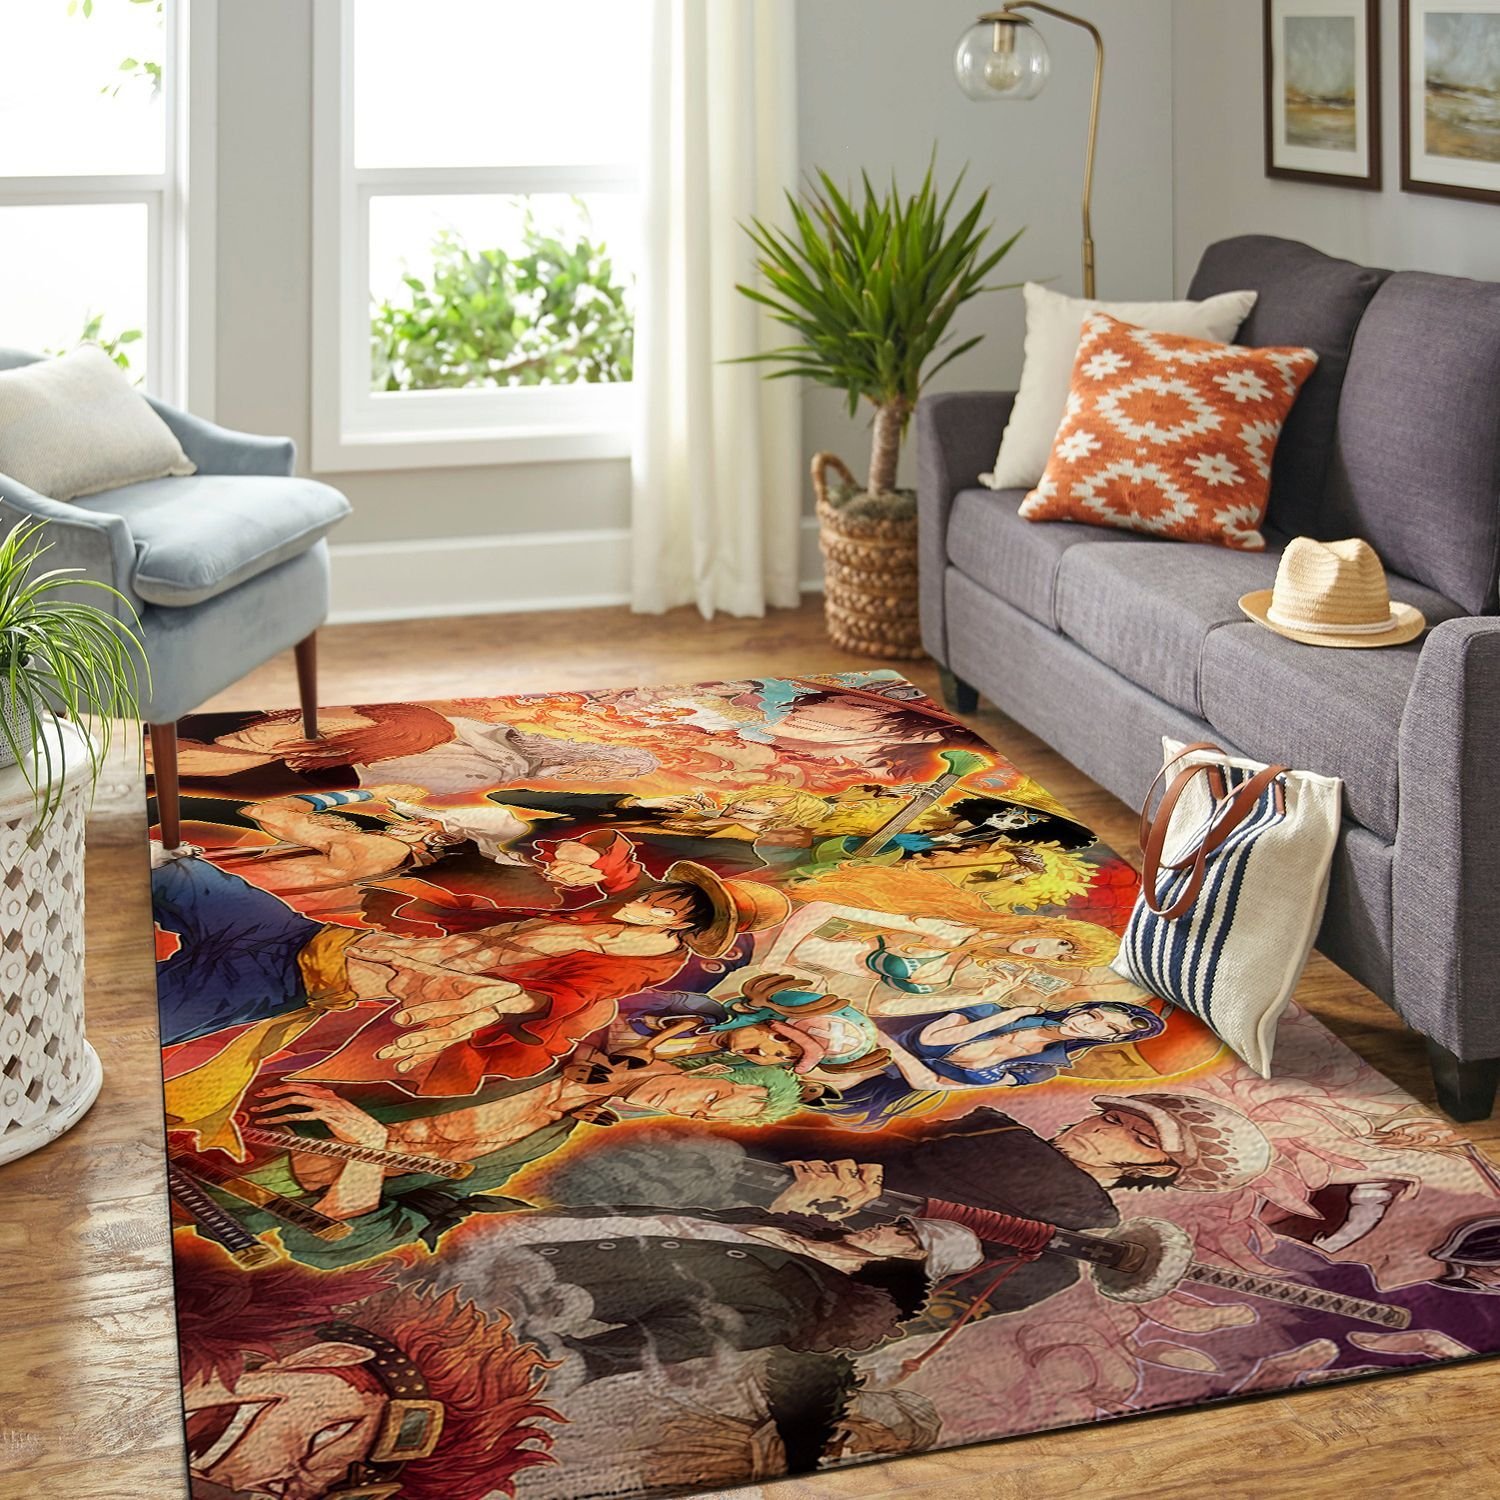 Amazon Onepiece-luffy Living Room Area No6438 Rug